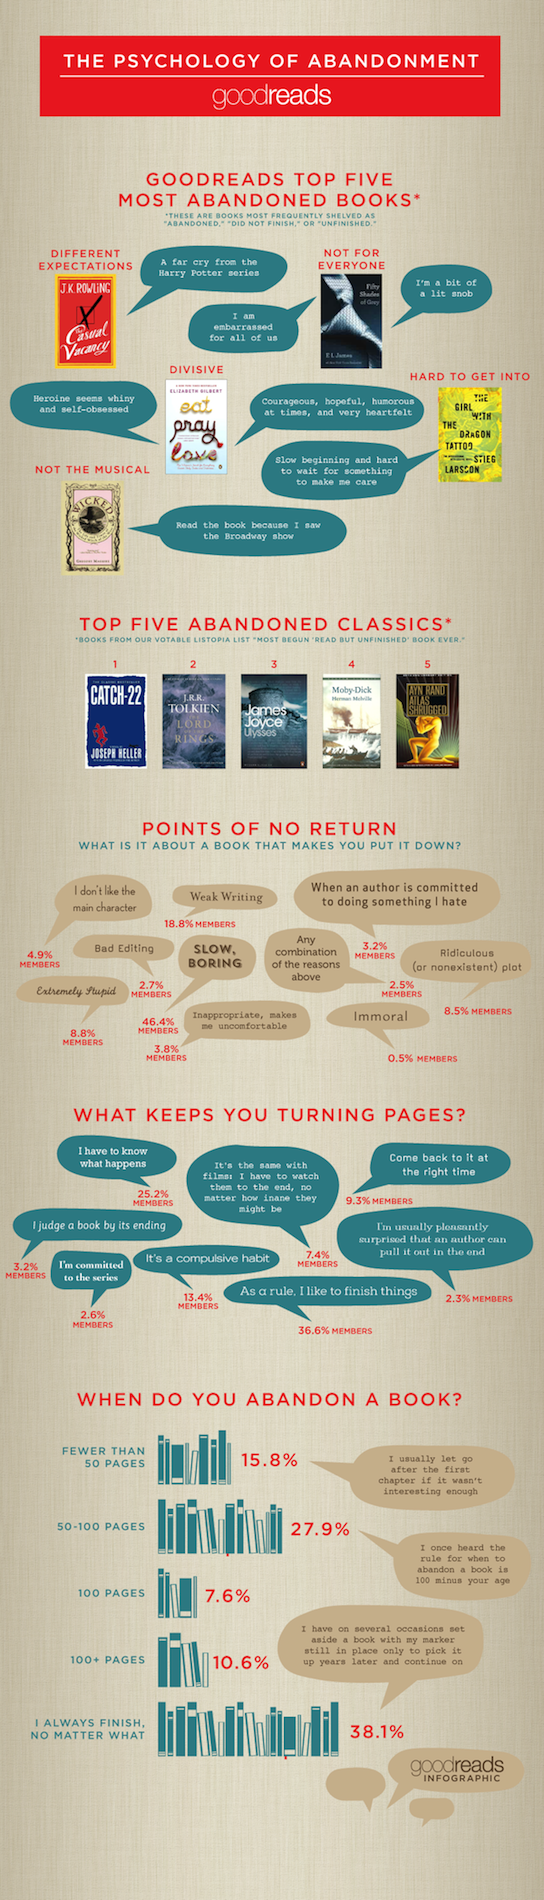 Goodreads-to-5-most-abandoned-books-infographic